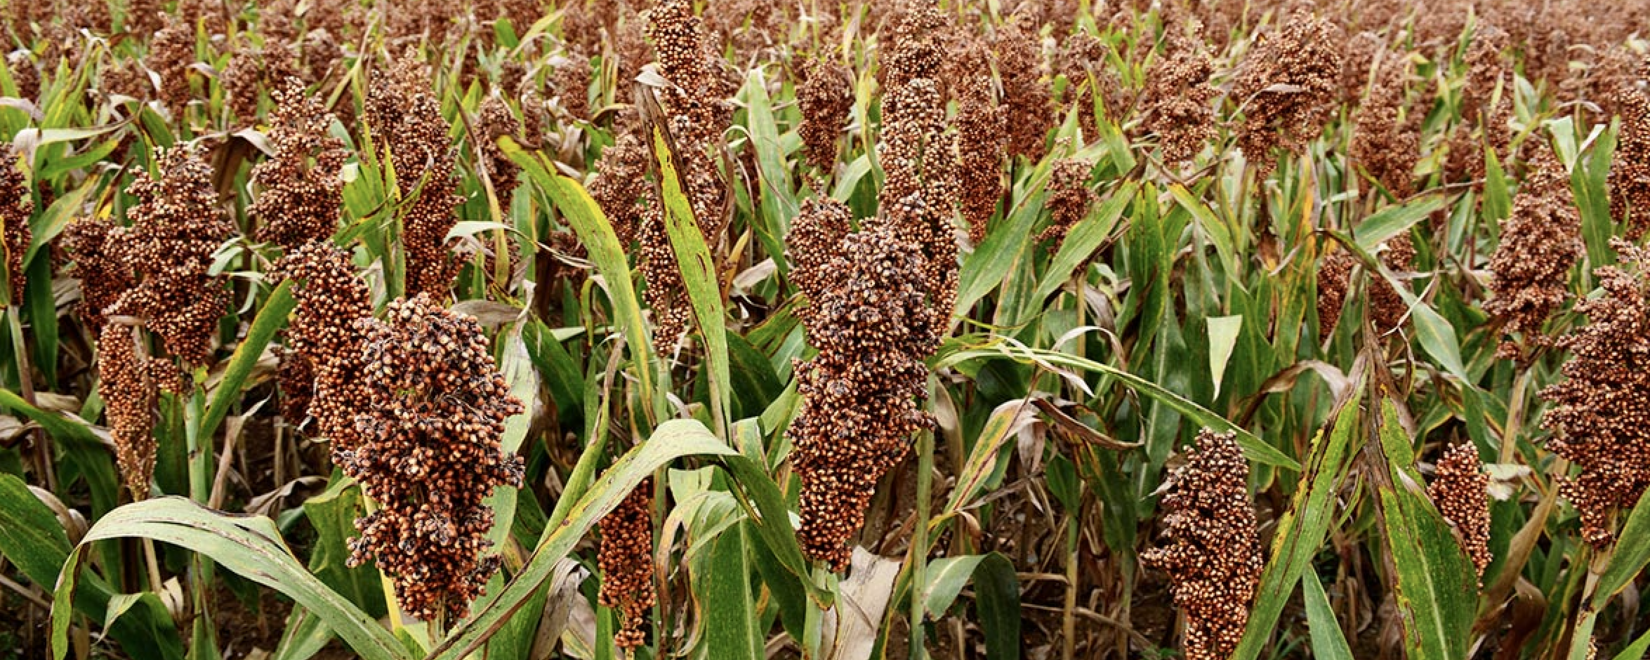 What is happening with the millet and millet market?